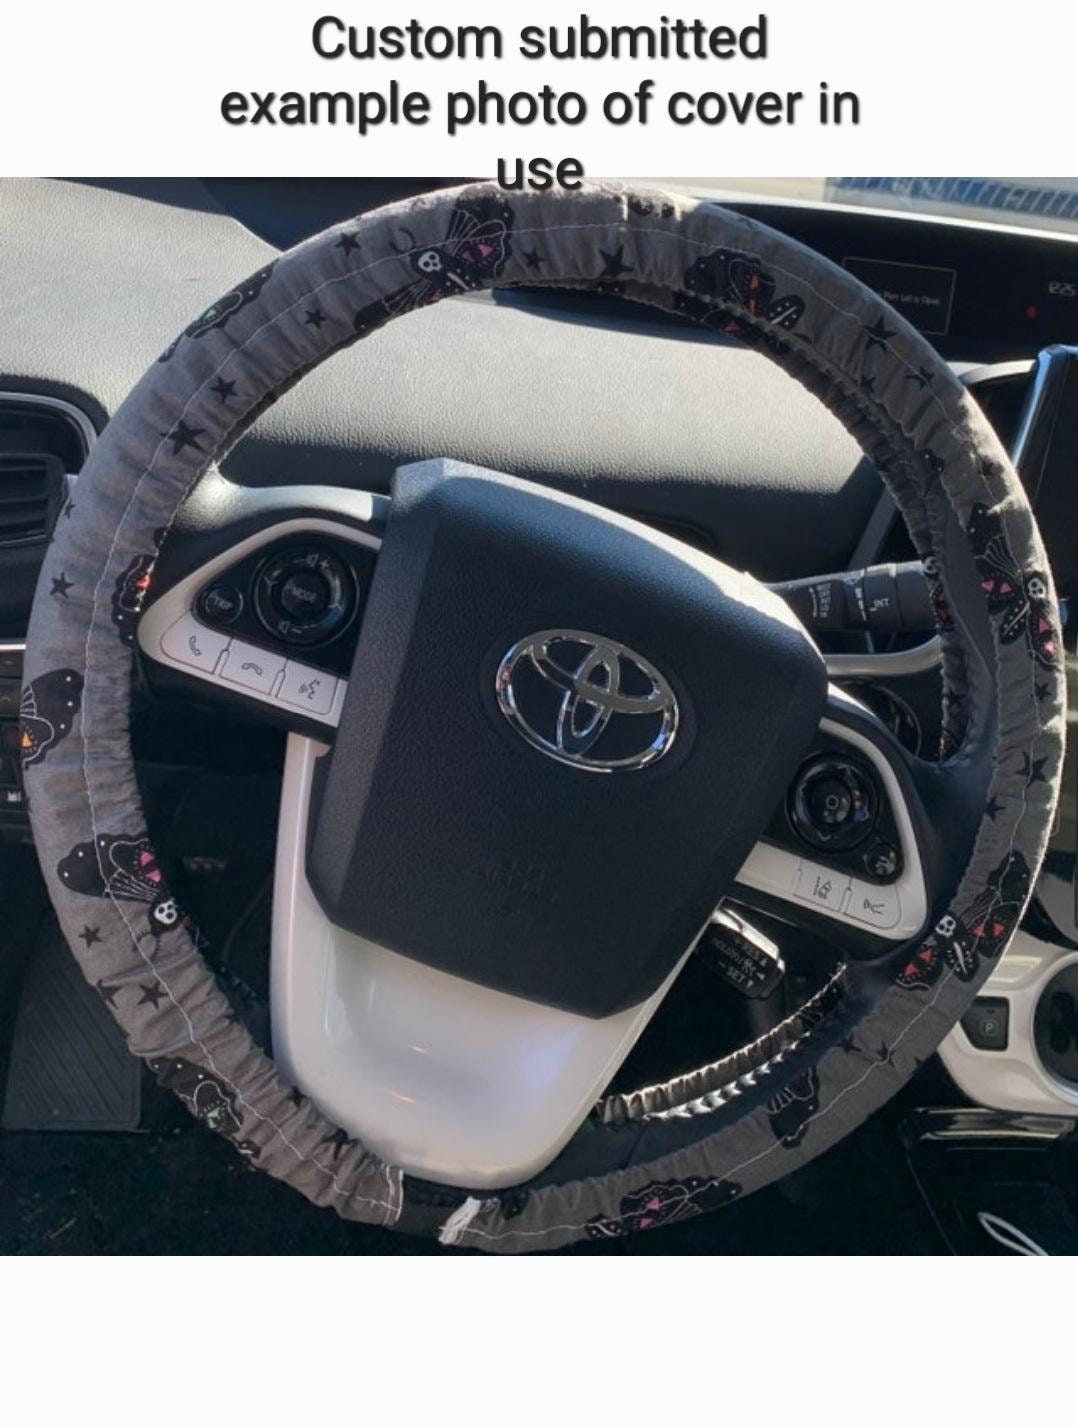 Sugar Skull Steering Wheel Cover - Harlow's Store and Garden Gifts